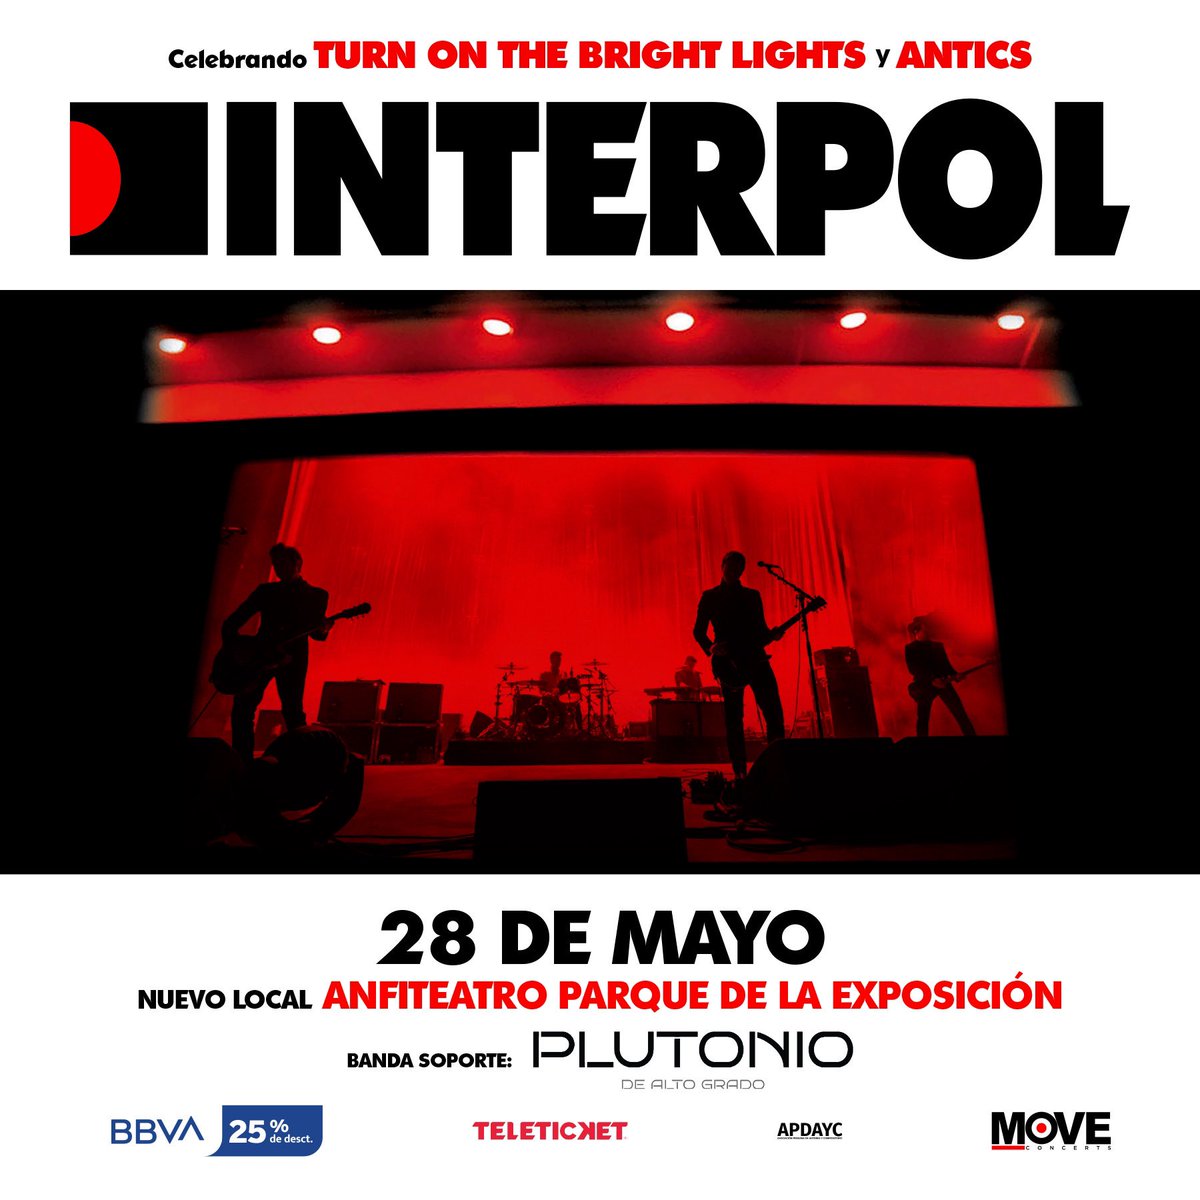 Please note our show in Lima on May 28th has now been moved to Anfiteatro del Parque de la Exposición. All tickets for the show remain valid.